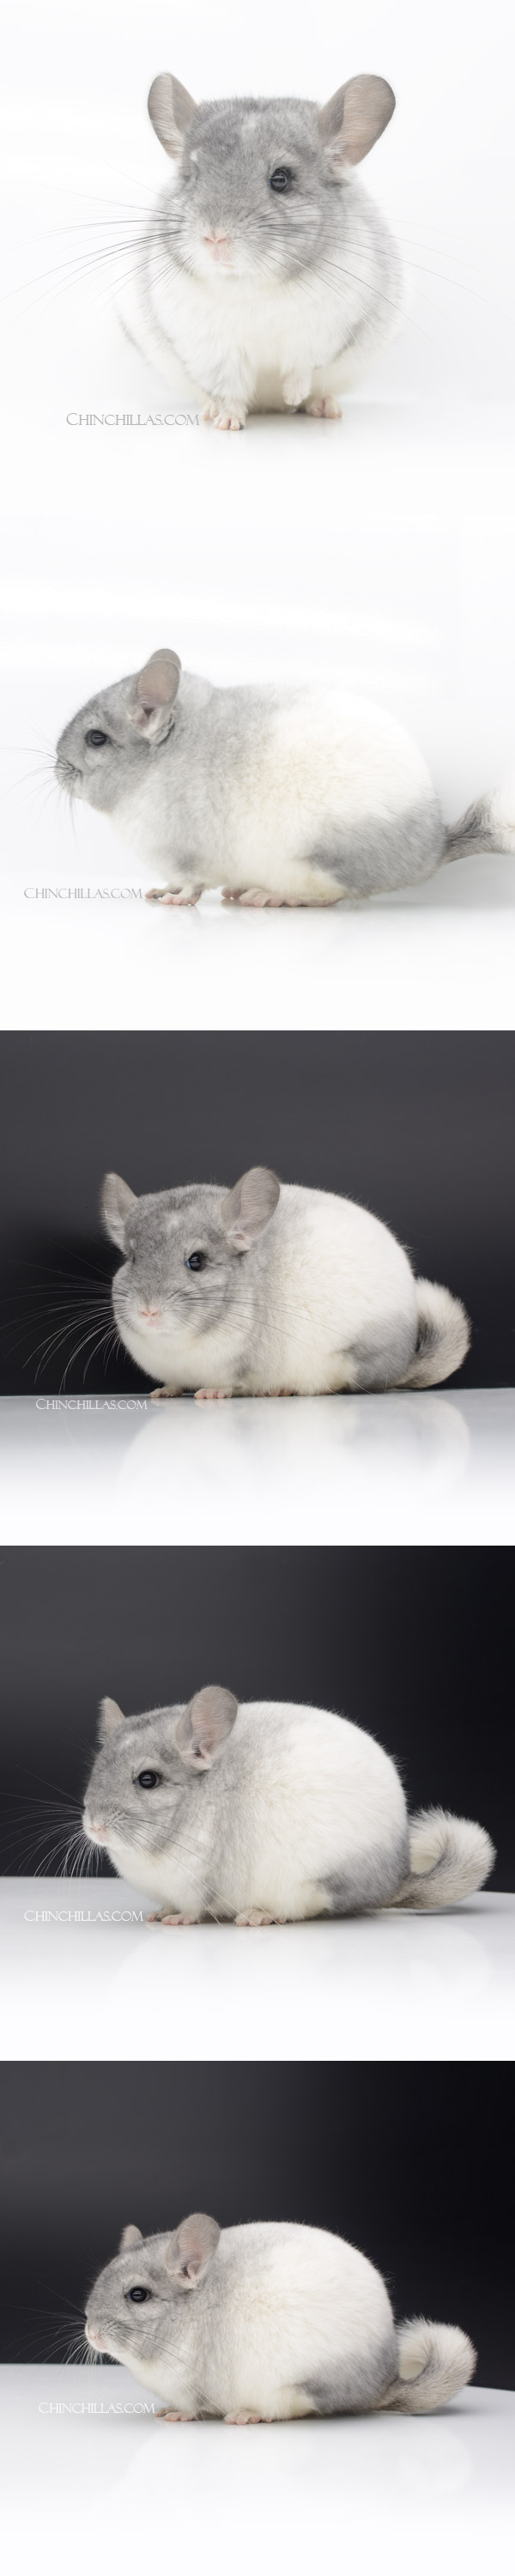 Chinchilla or related item offered for sale or export on Chinchillas.com - 23060 Blocky Show Quality White Mosaic Female Chinchilla